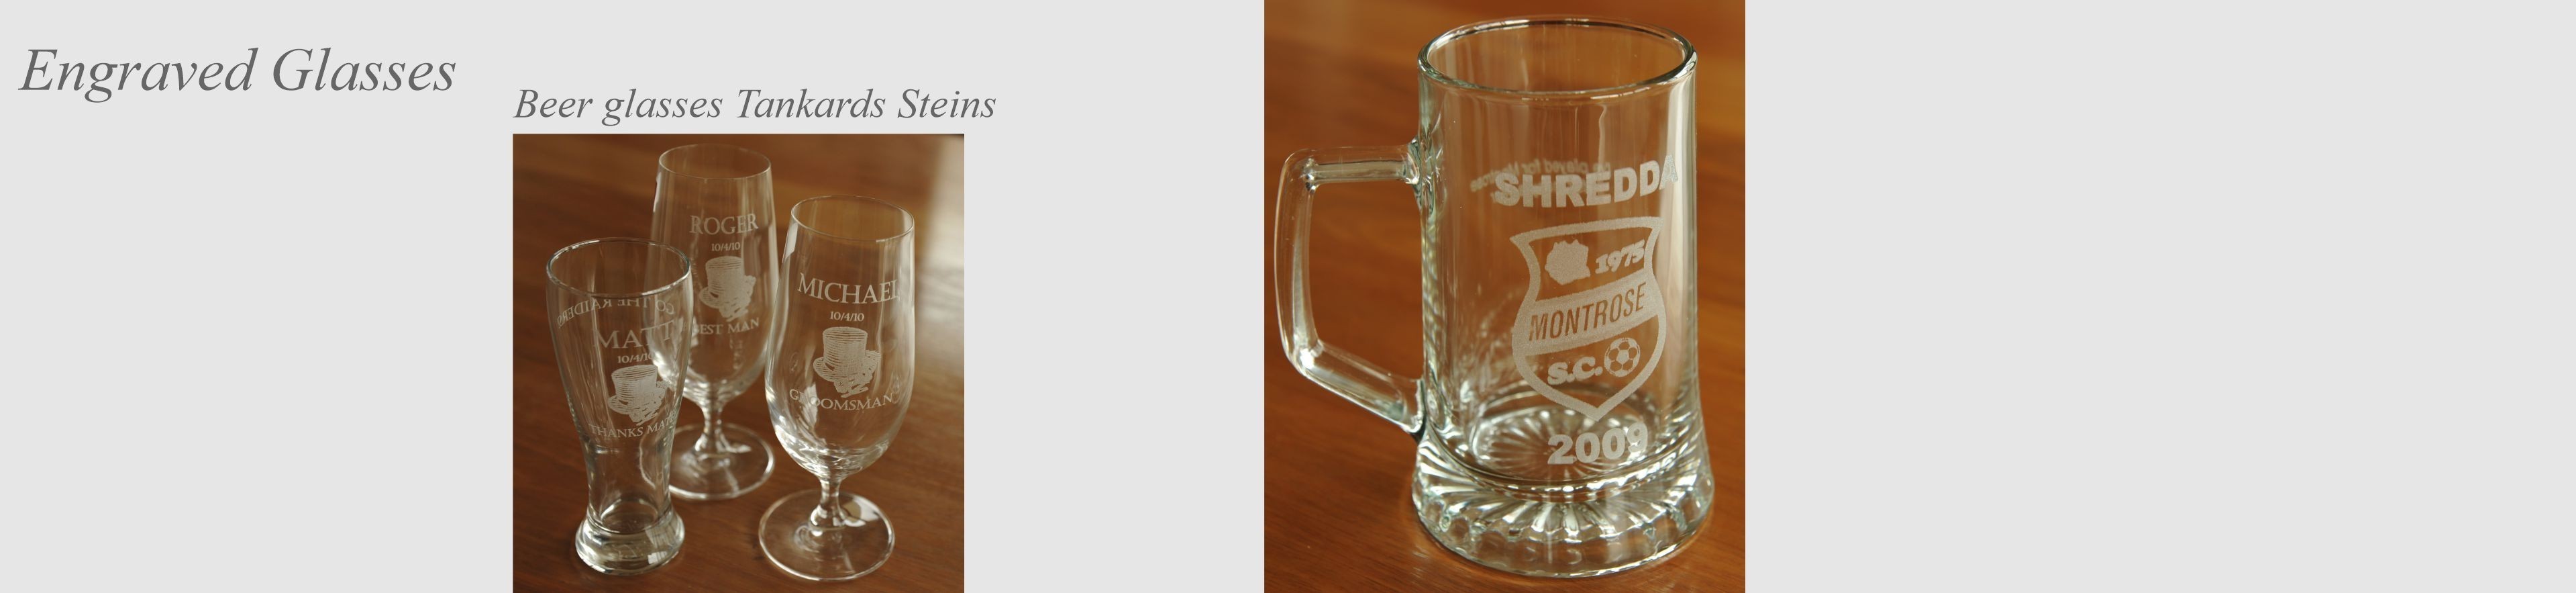 Engraved Beer glass and Tankards